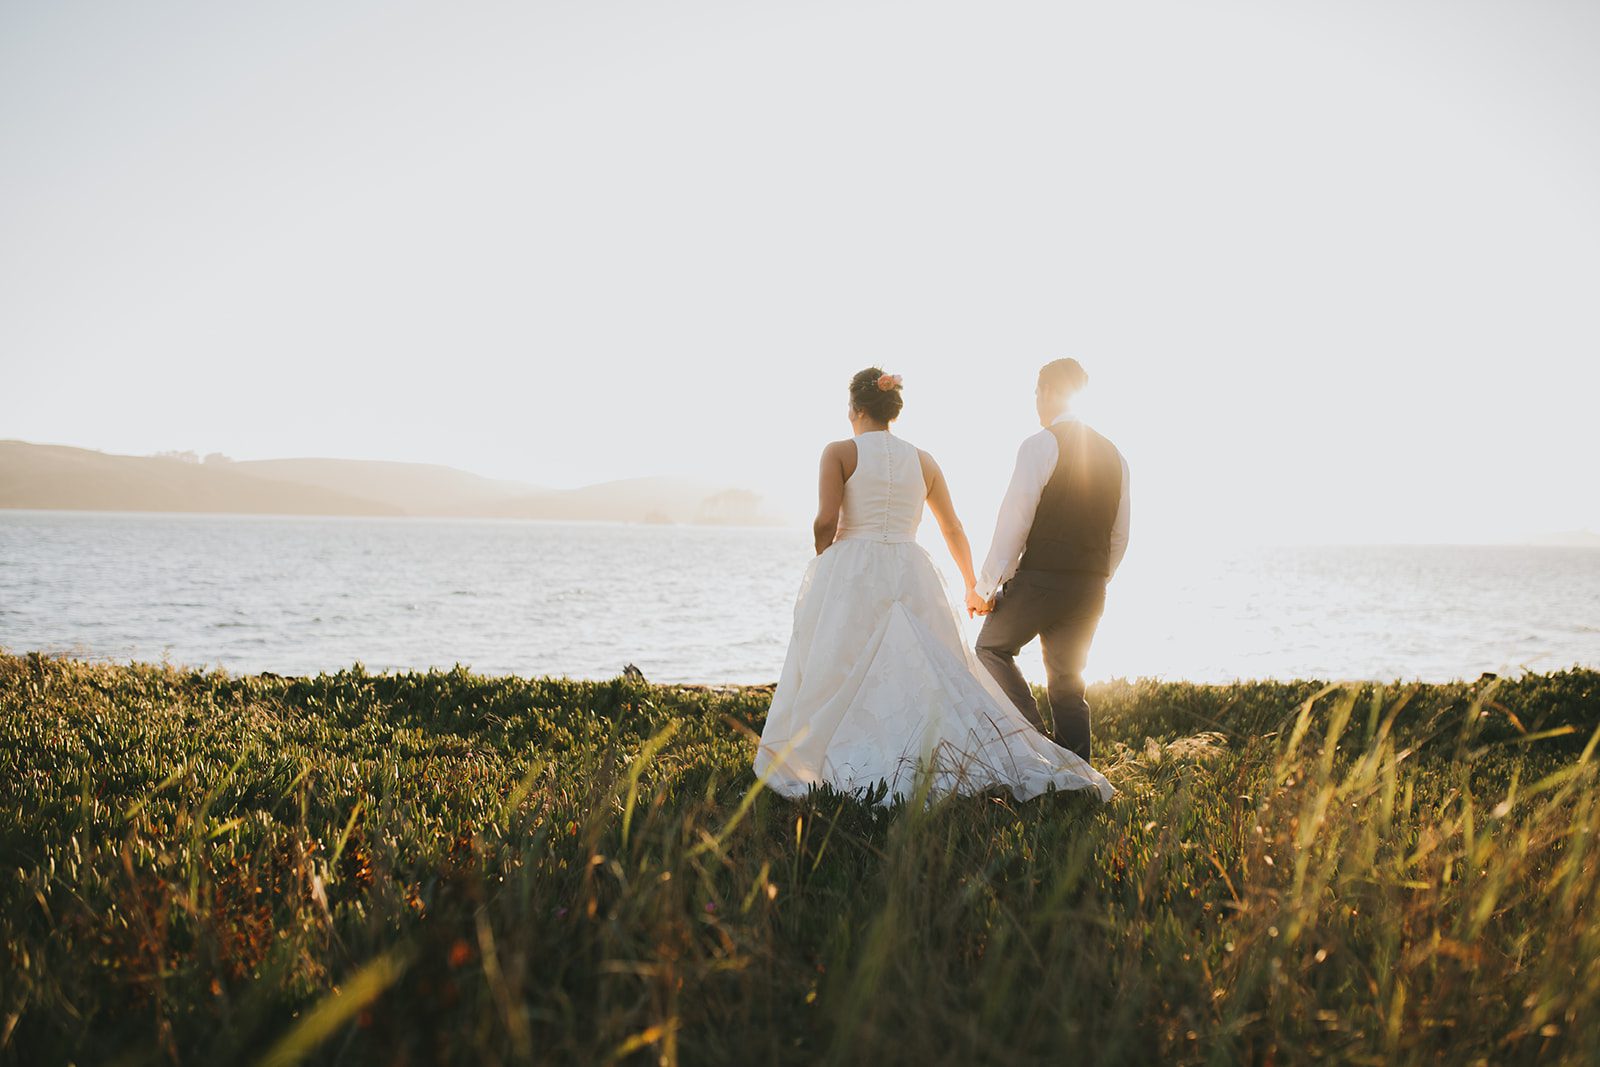 A bride and groom standing in a grassy field near the water.